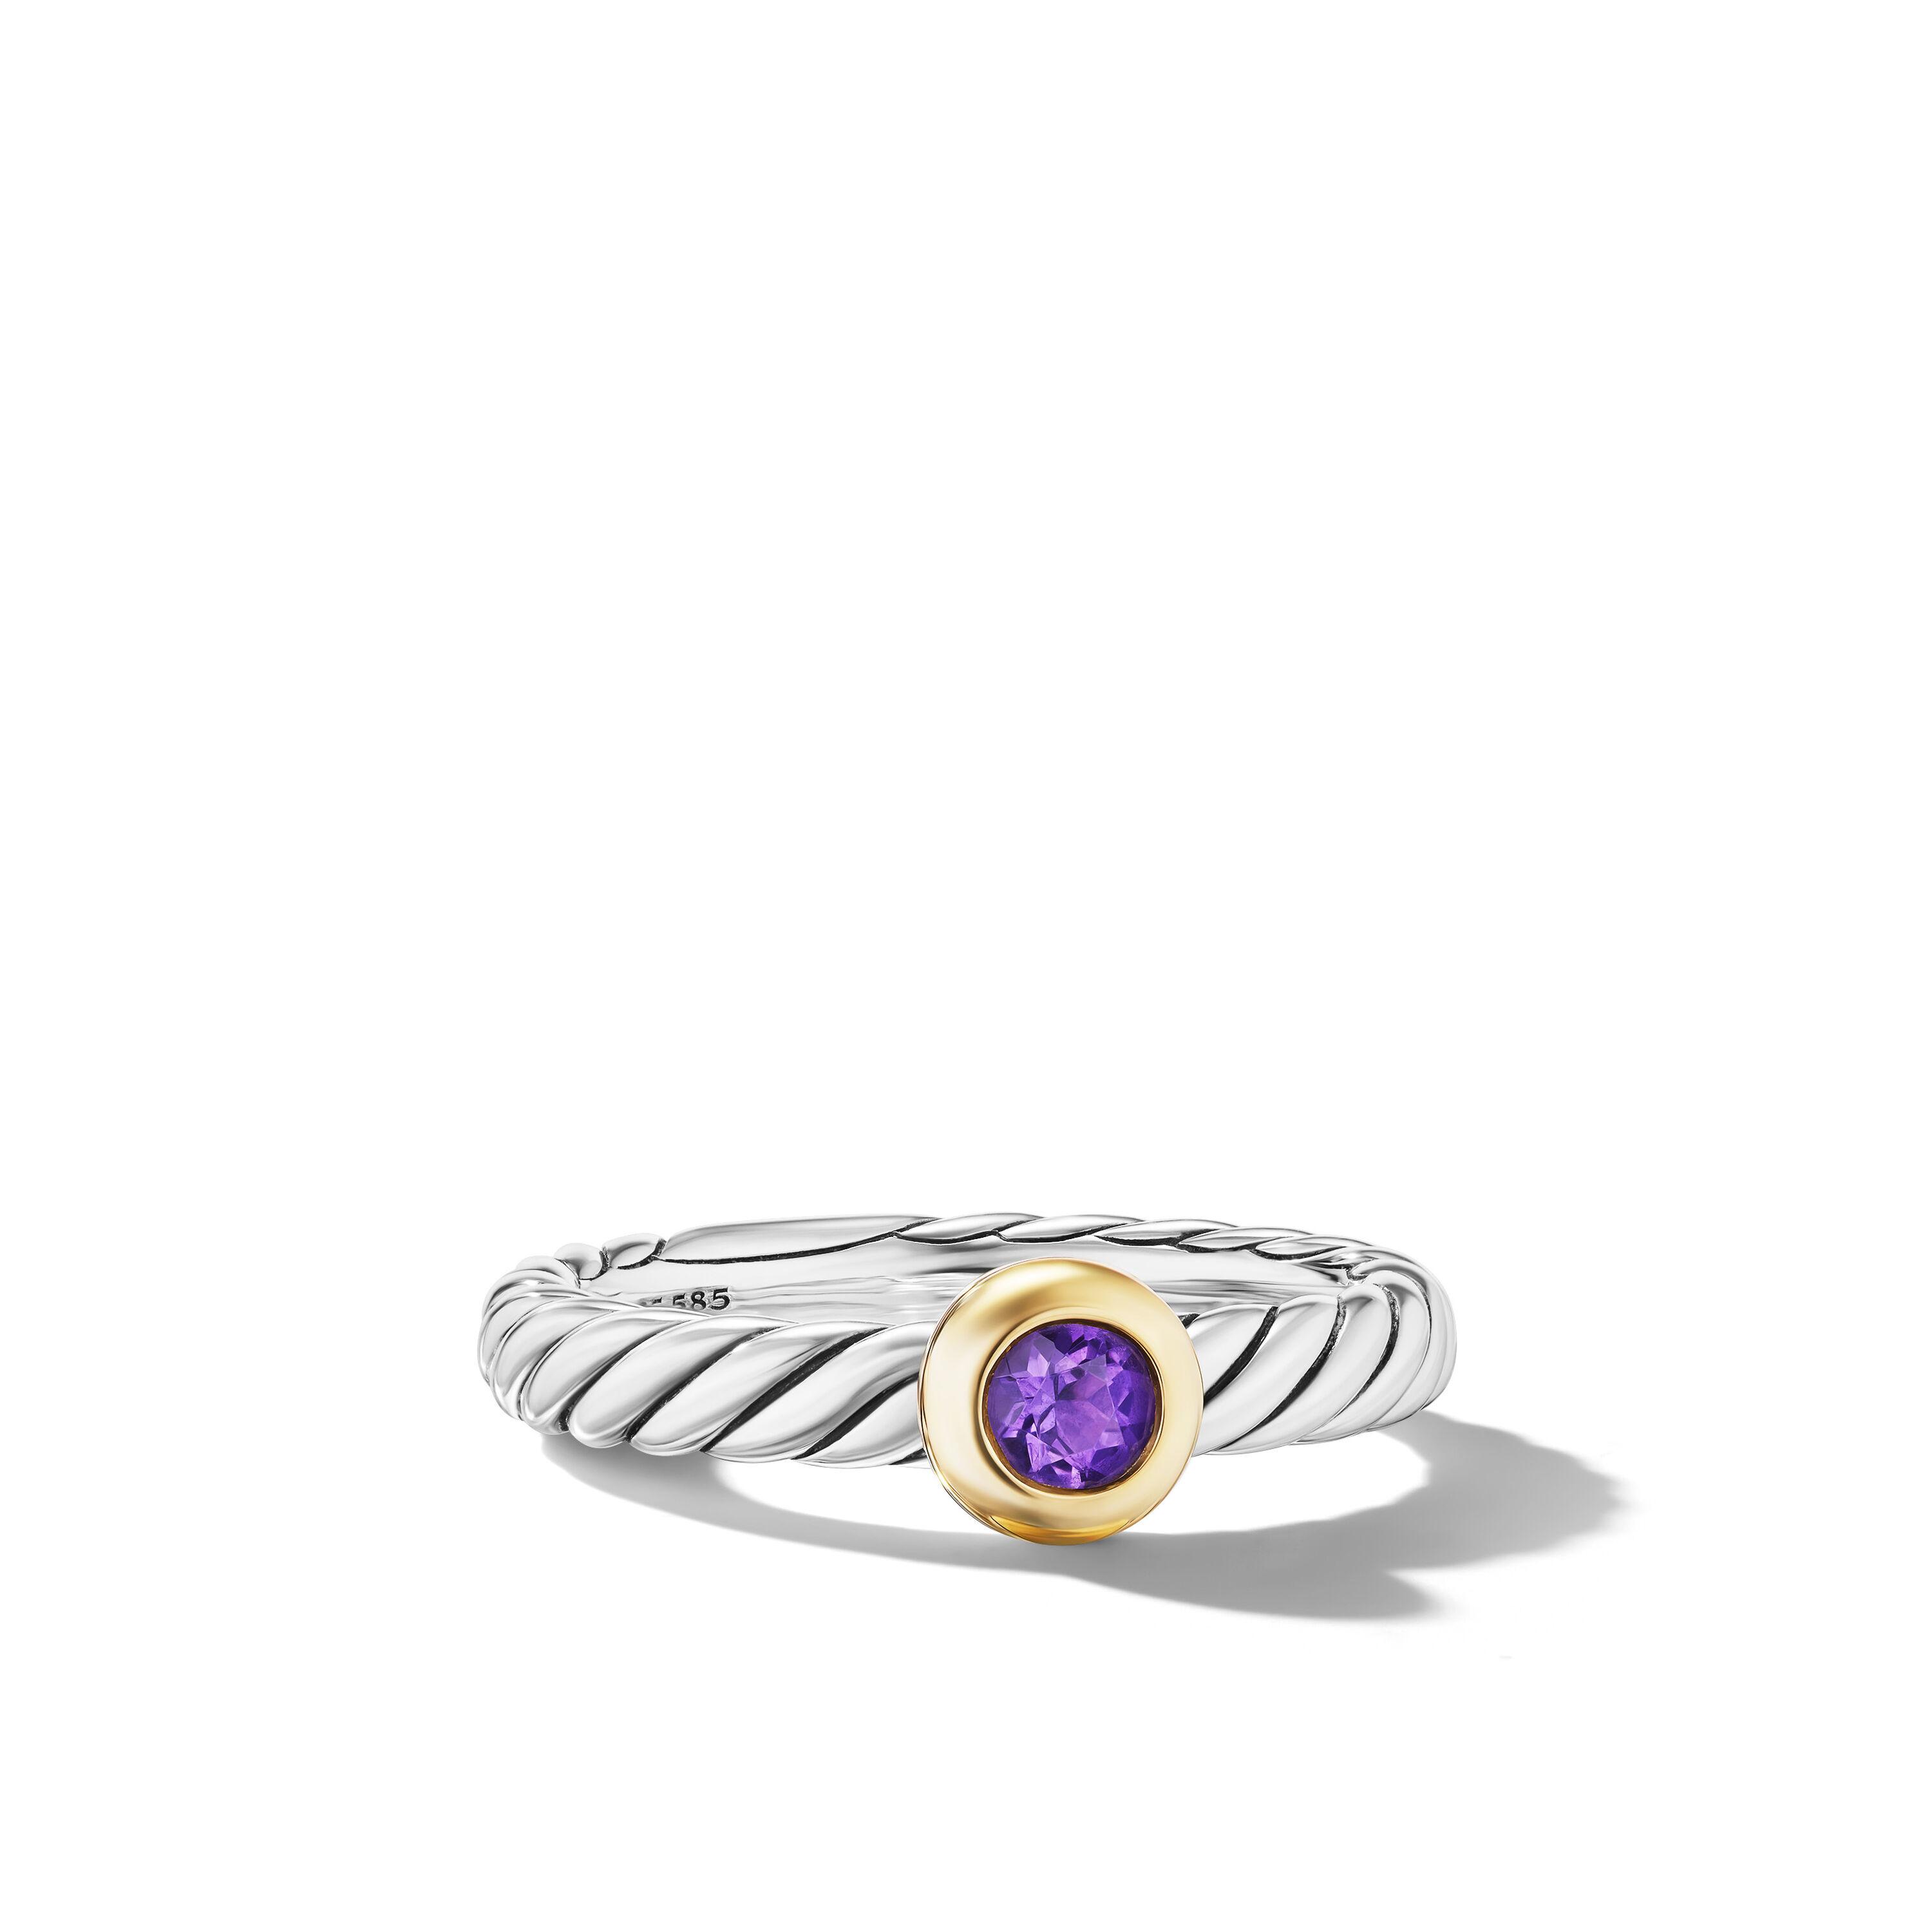 David Yurman Petite Cable Ring in Sterling Silver with 14K Yellow Gold and Amethyst, Size 6